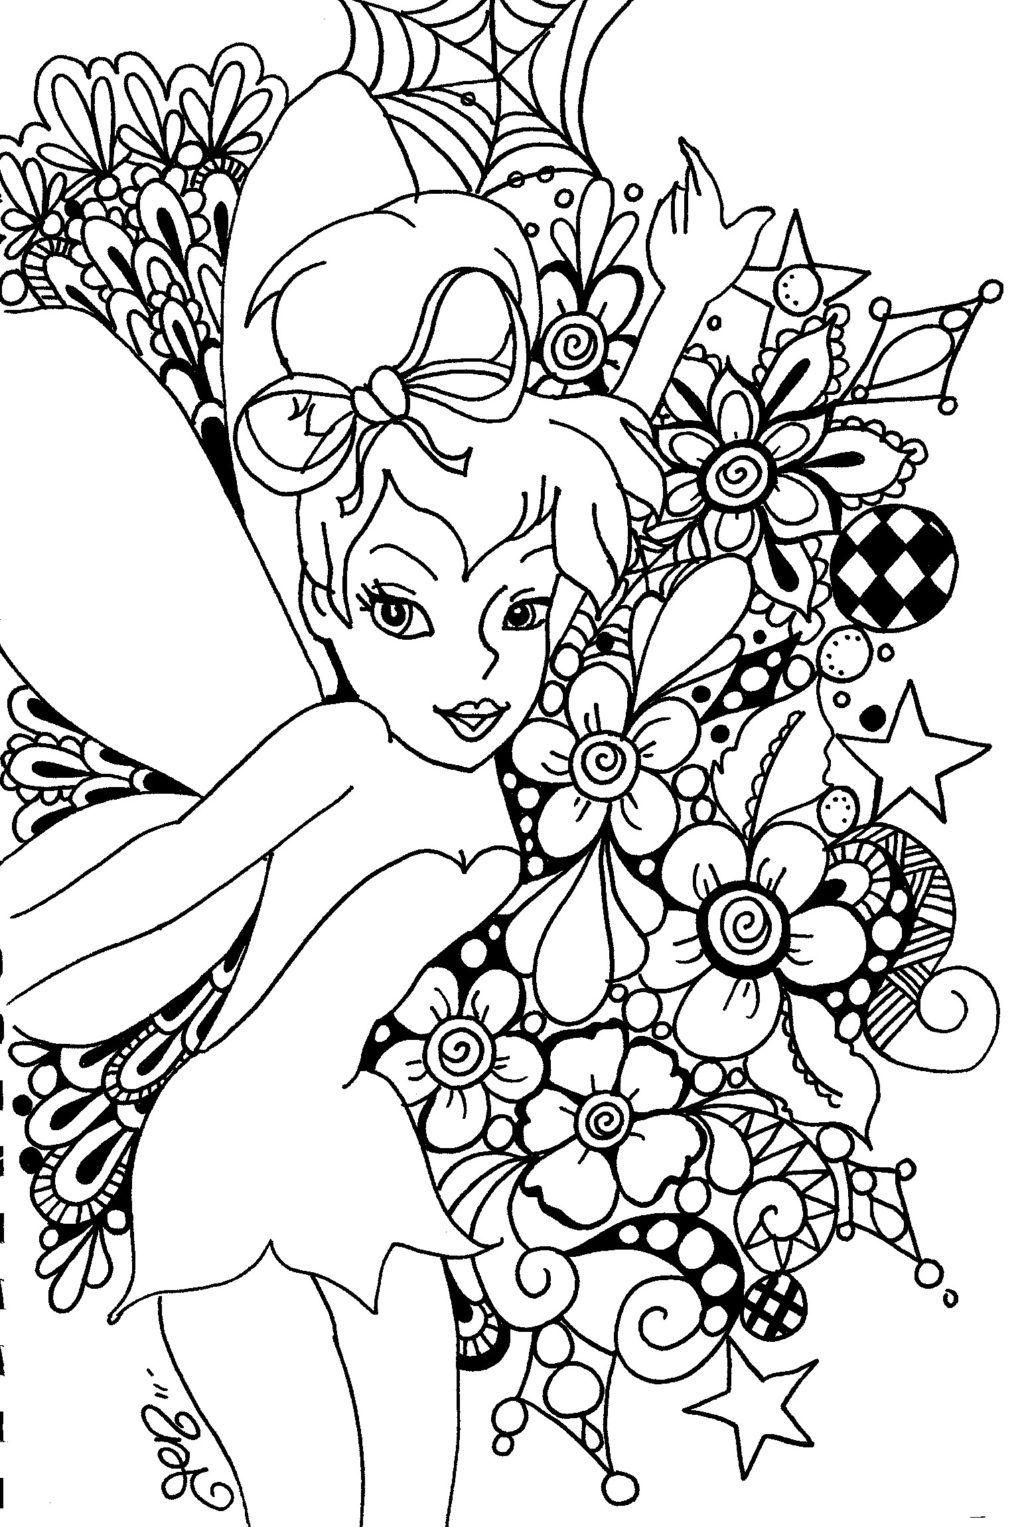 Coloring Pages Online To Print Coloring Book World Coloring Bookorld Pages Online To Print Free